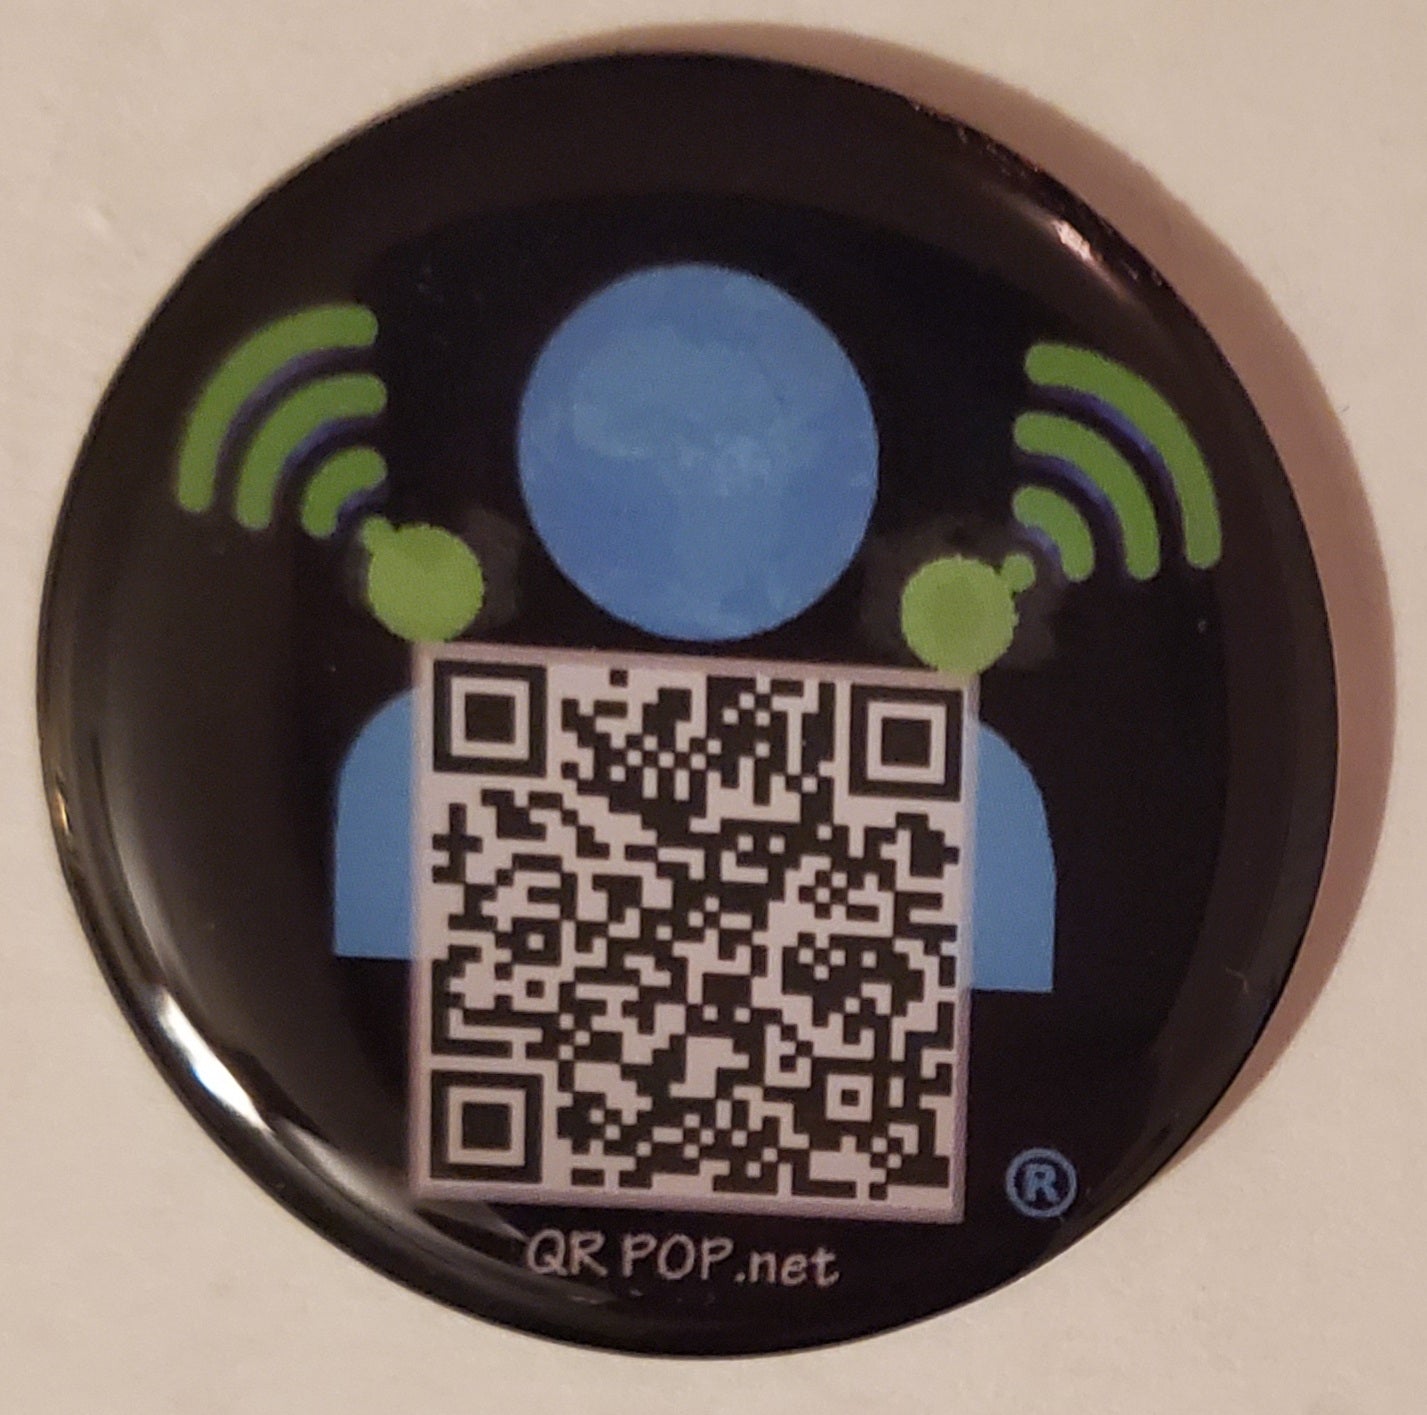 QR POP BOLD WITH CONTACT CONFIRMATION